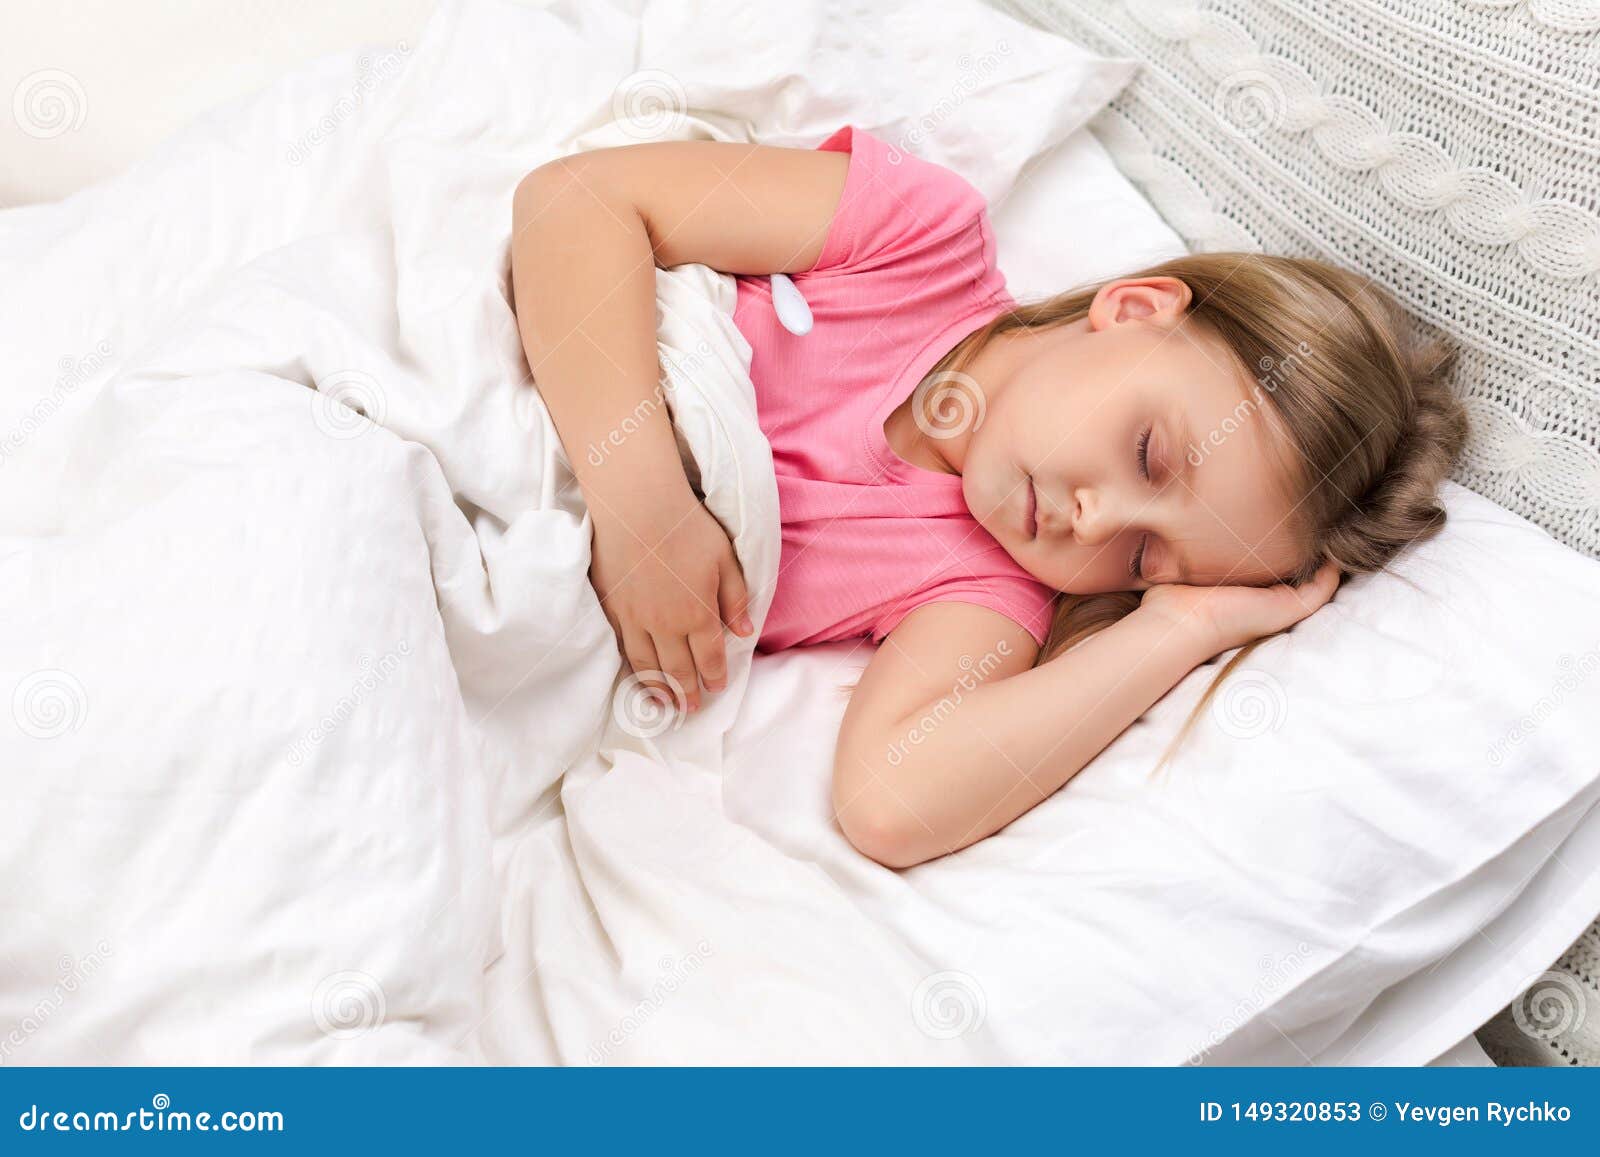 Sick Little Girl Lying in Bed with Thermometer Stock Image - Image of ...